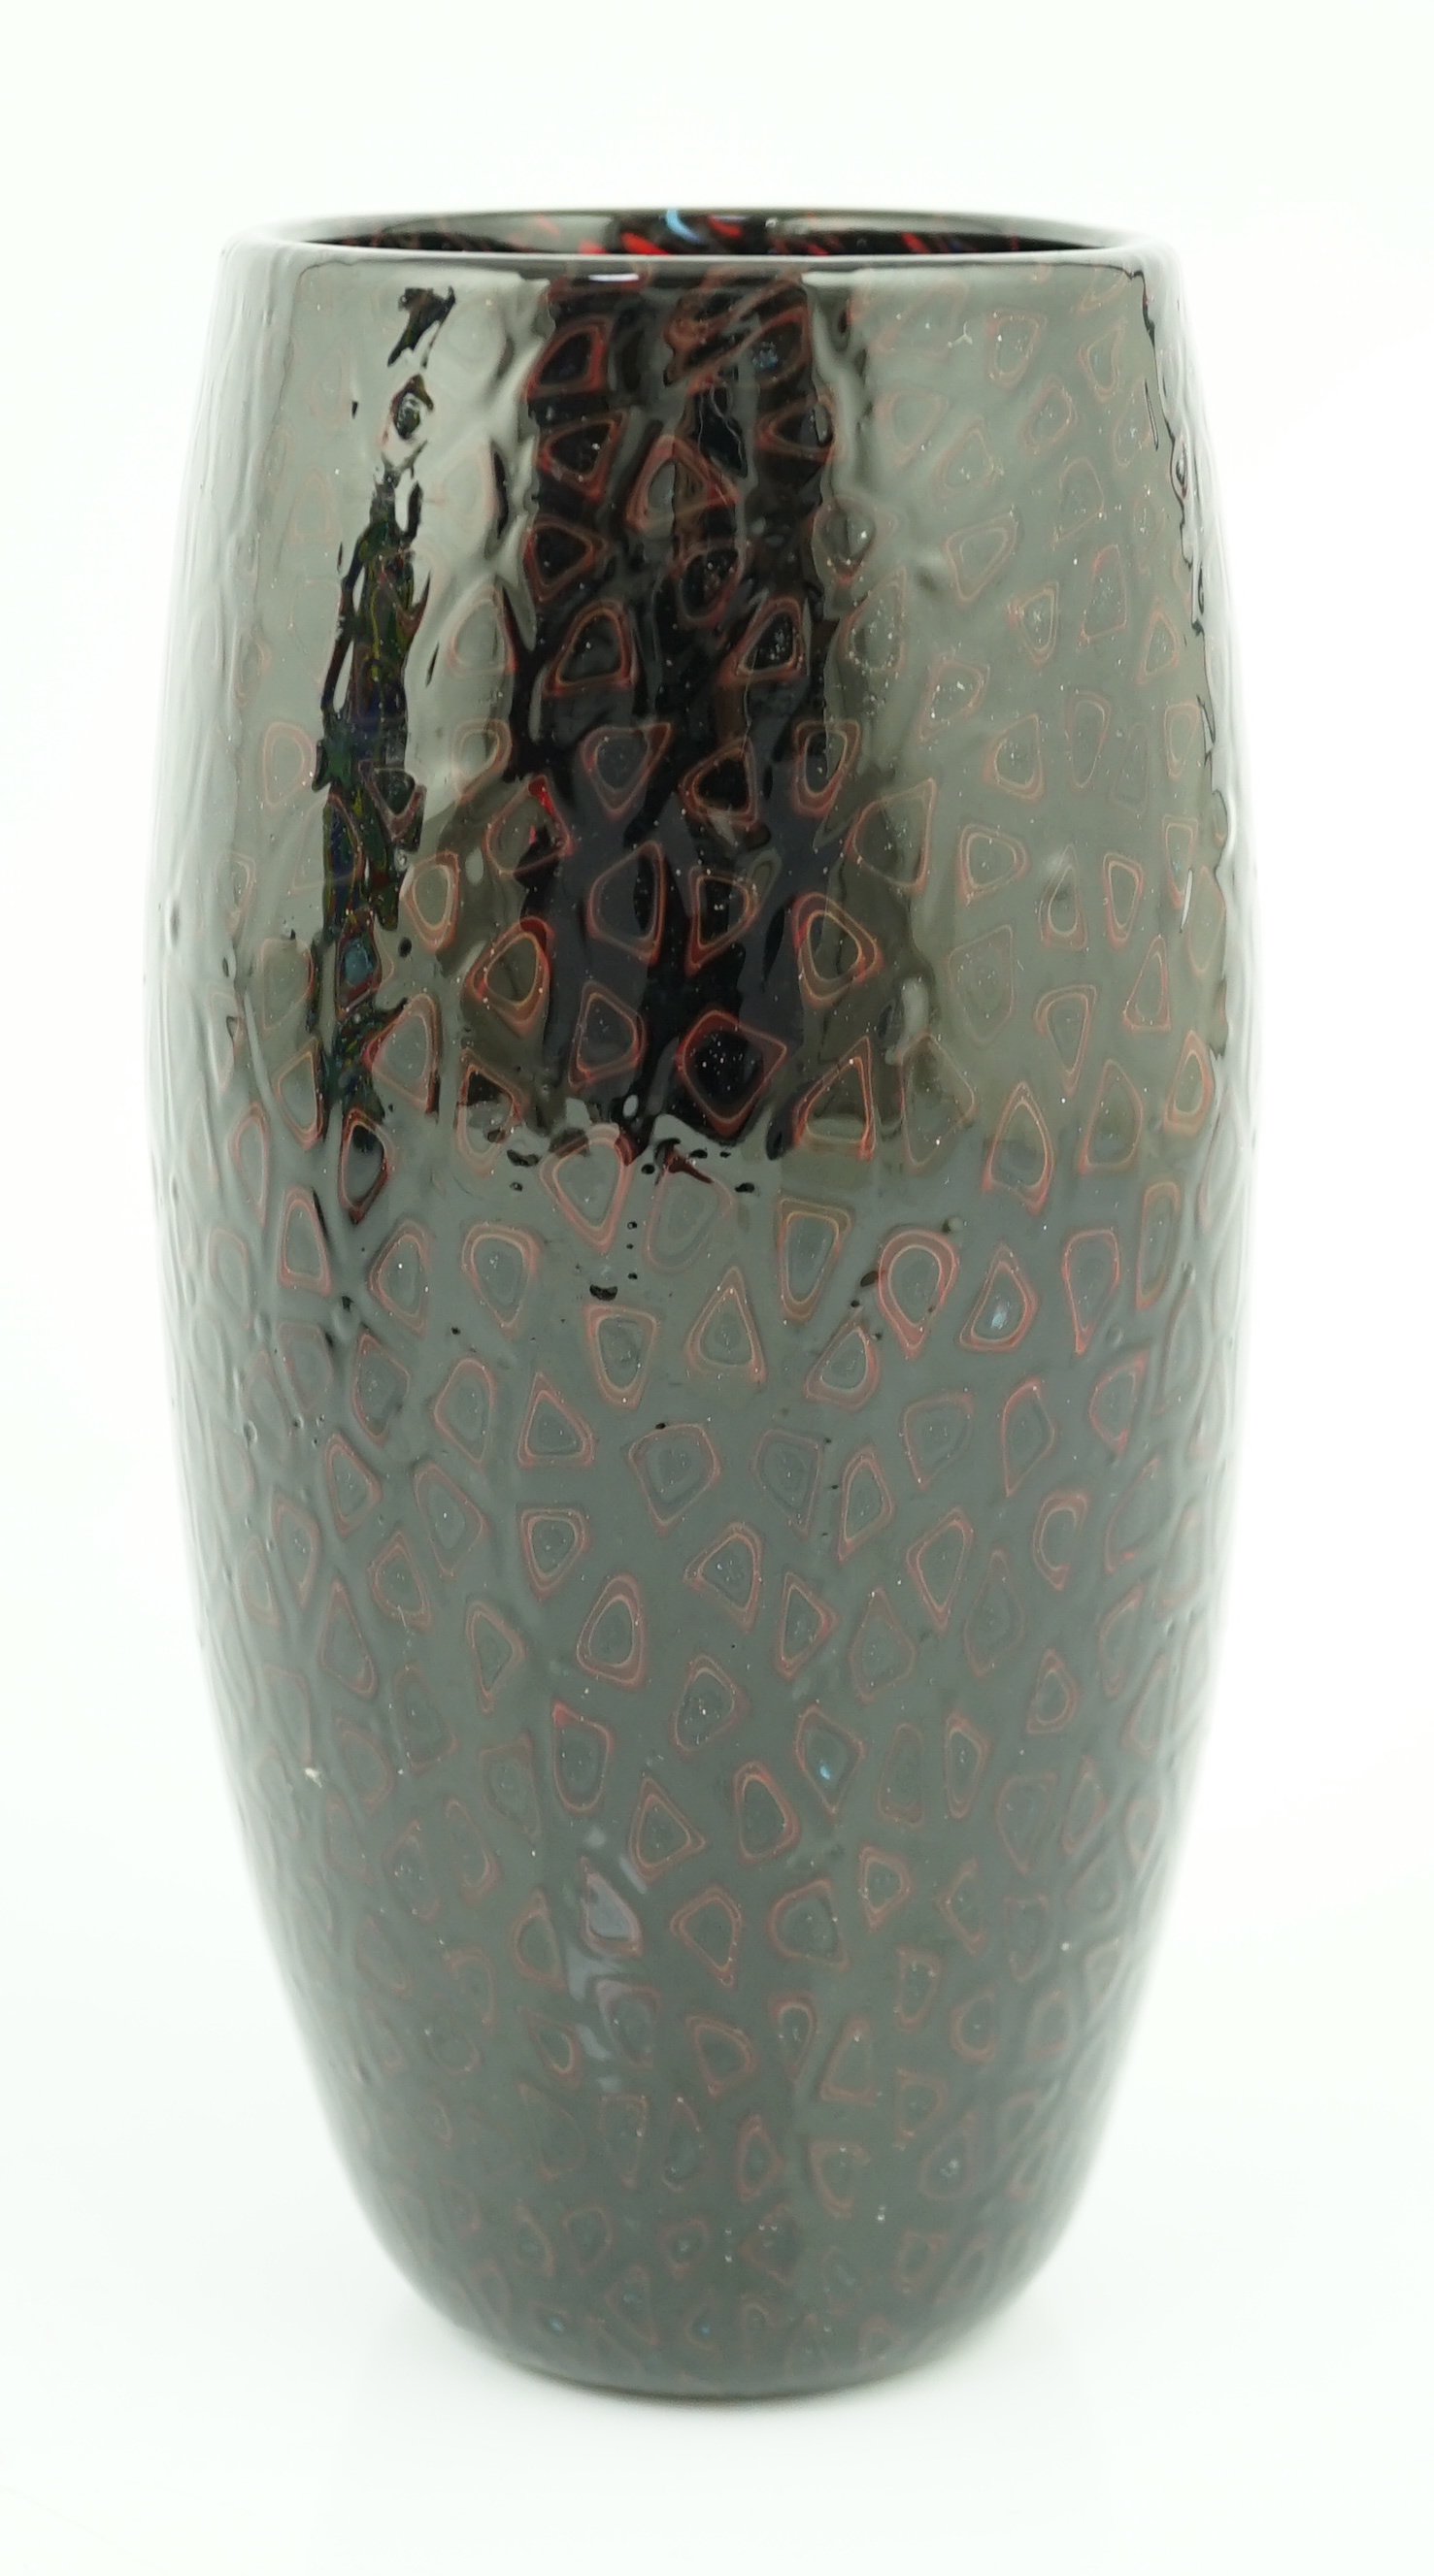 Vittorio Ferro (1932-2012) A Murano glass Murrine vase, in dark red and blue, unsigned, 24.5cm., Please note this lot attracts an additional import tax of 20% on the hammer price